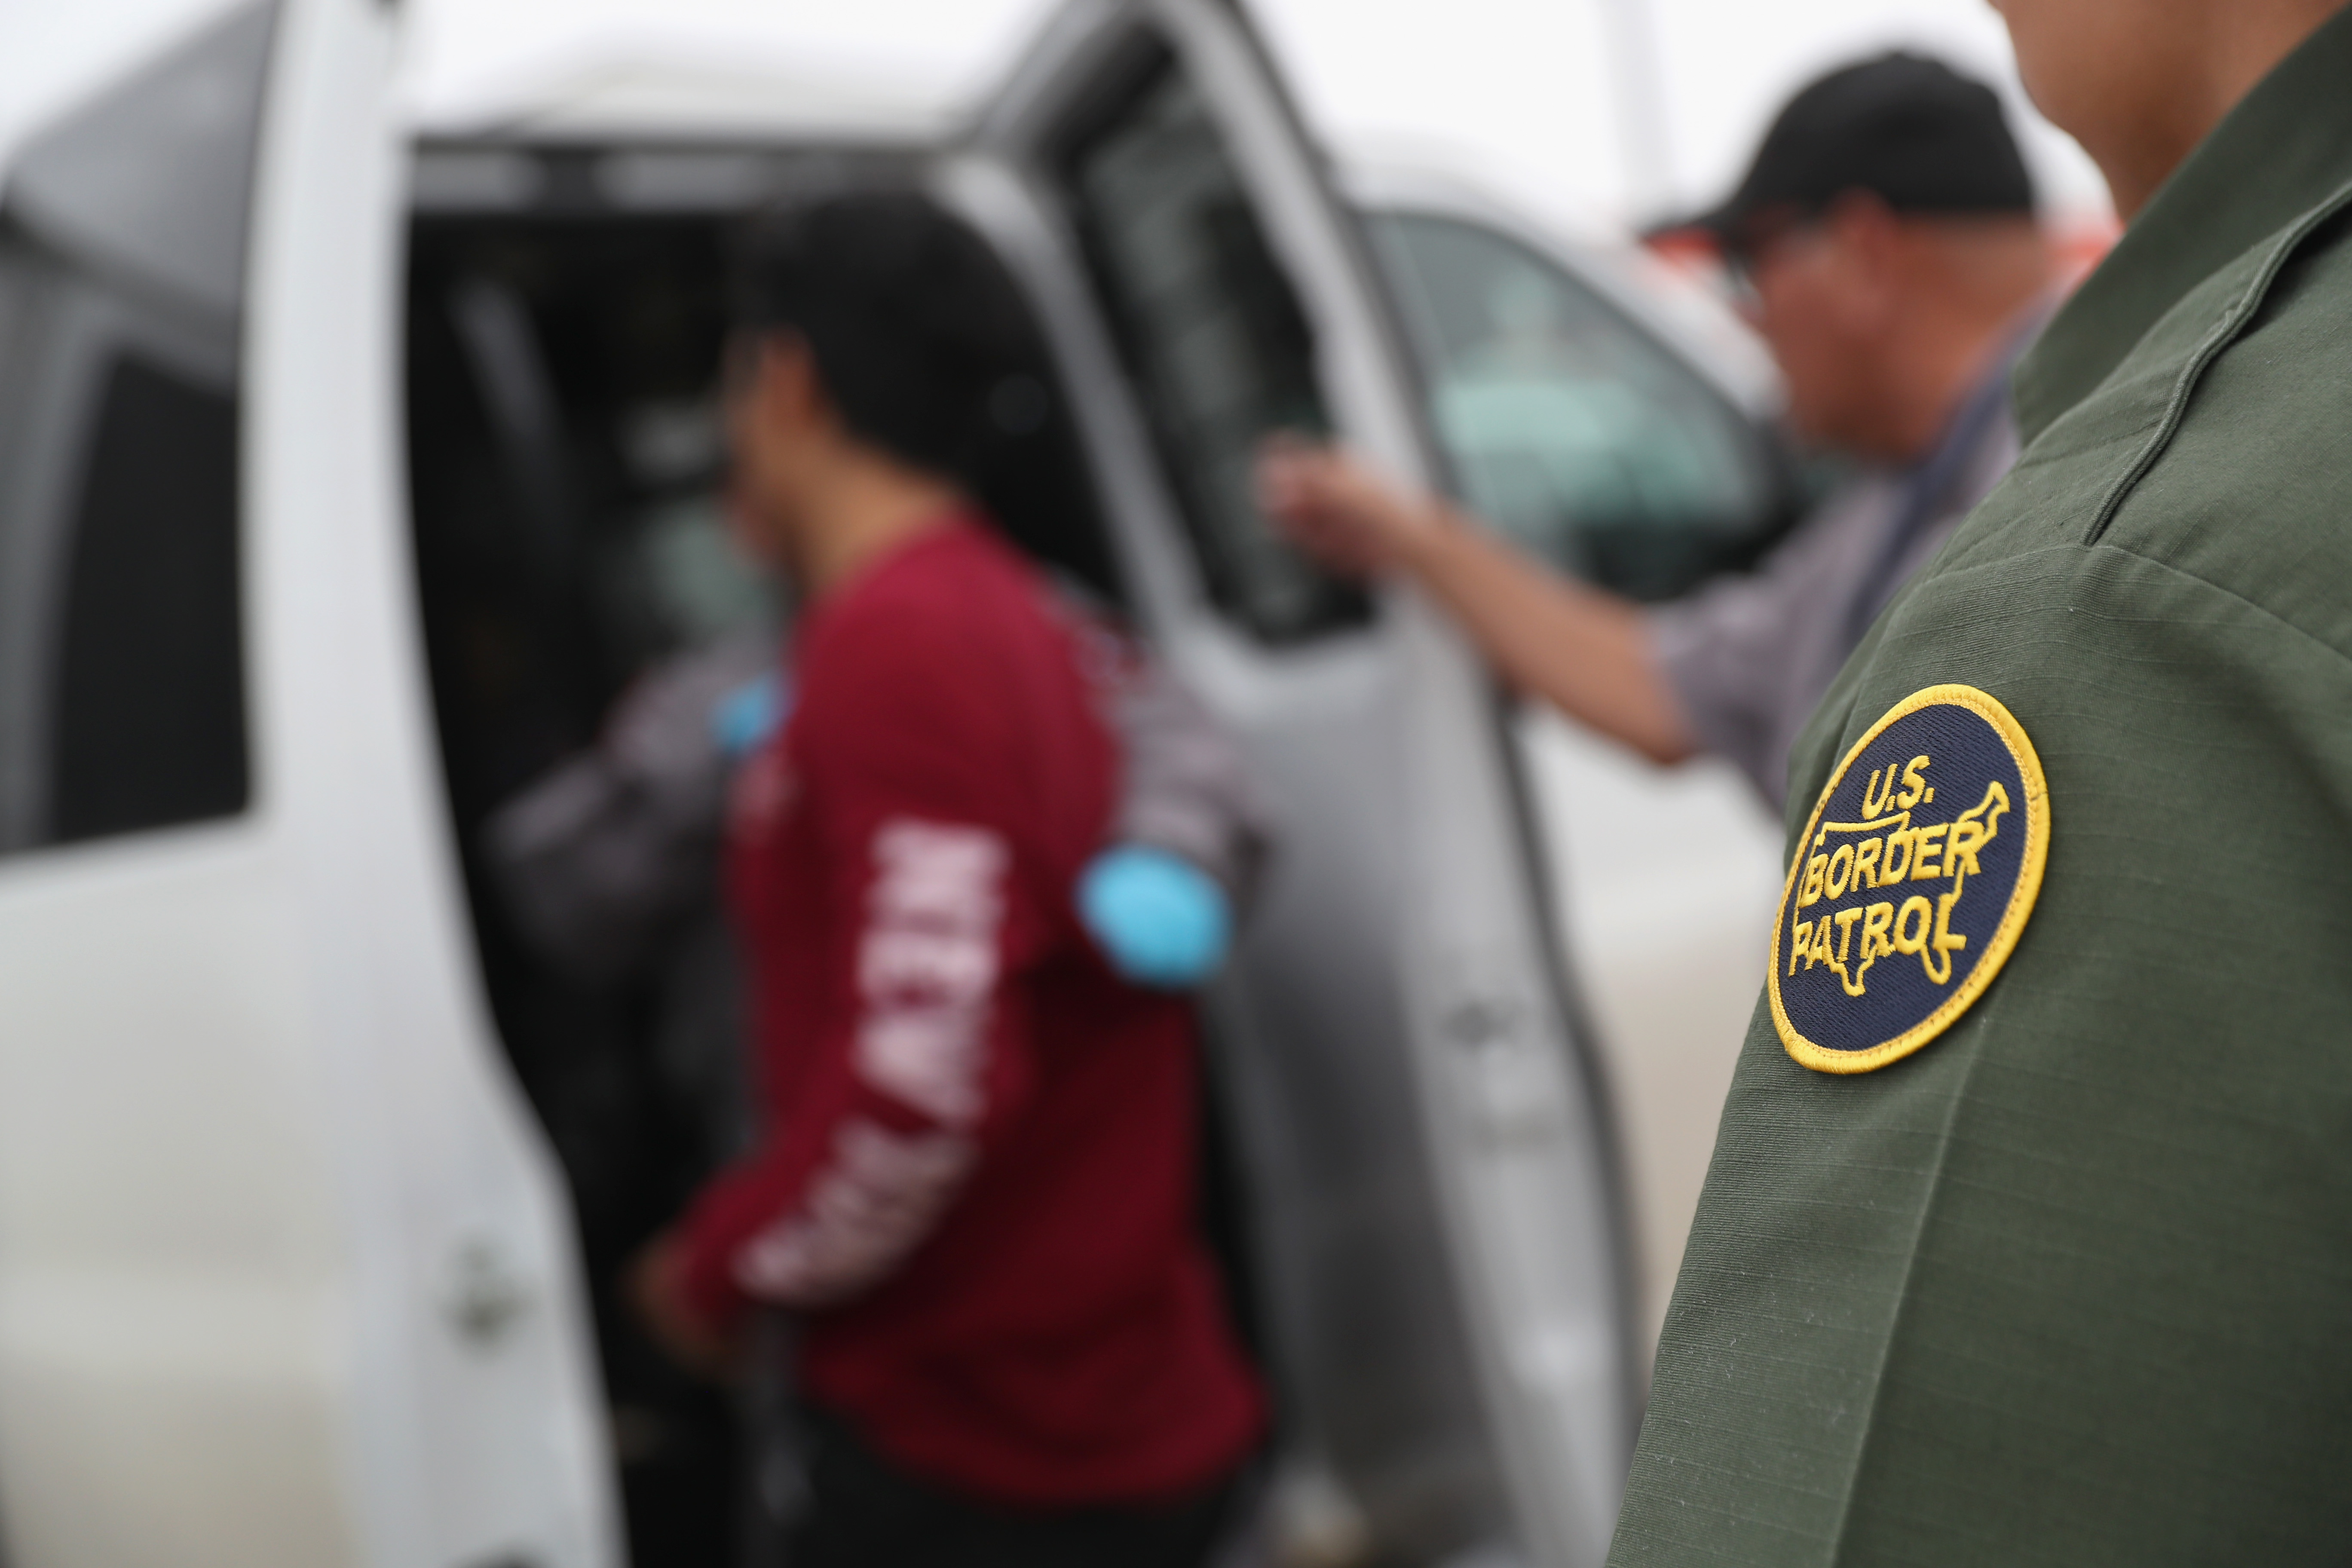 Biden Administration’s Selective Deportation Policy That States Say Endangers Communities Is Challenged in Supreme Court